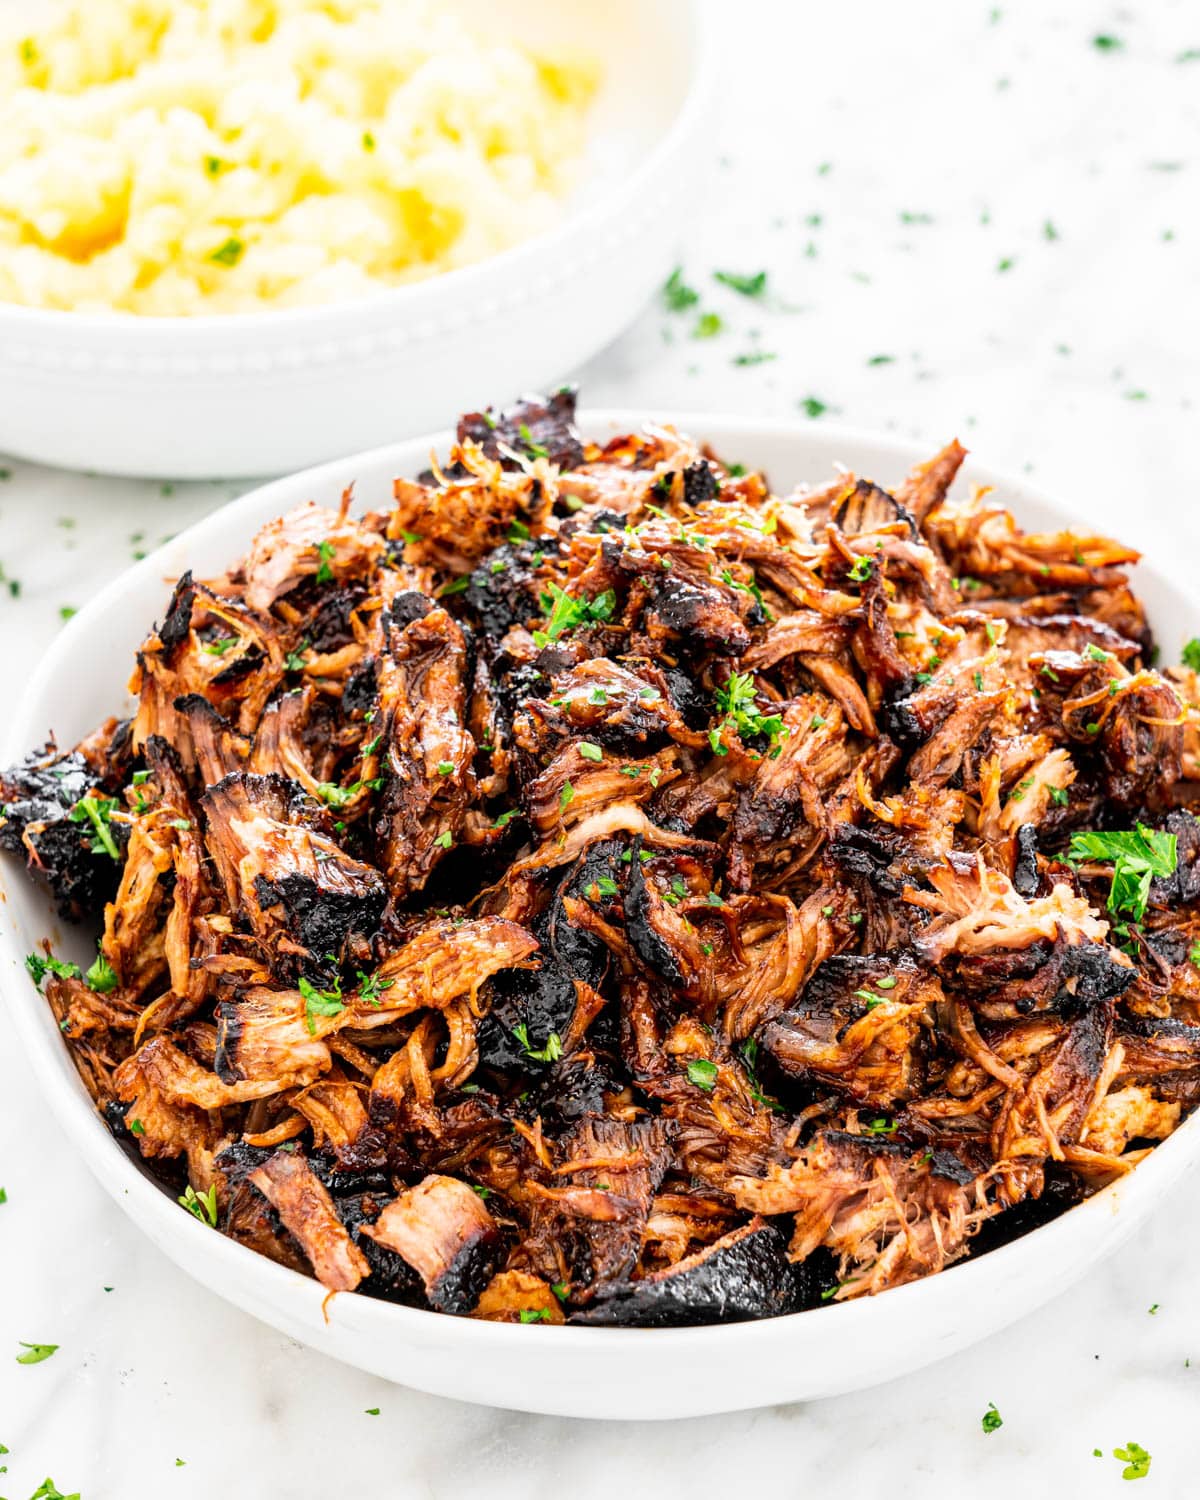 Brown Sugar Balsamic Pulled Pork in a white bowl with a bowl of mashed potatoes in the background